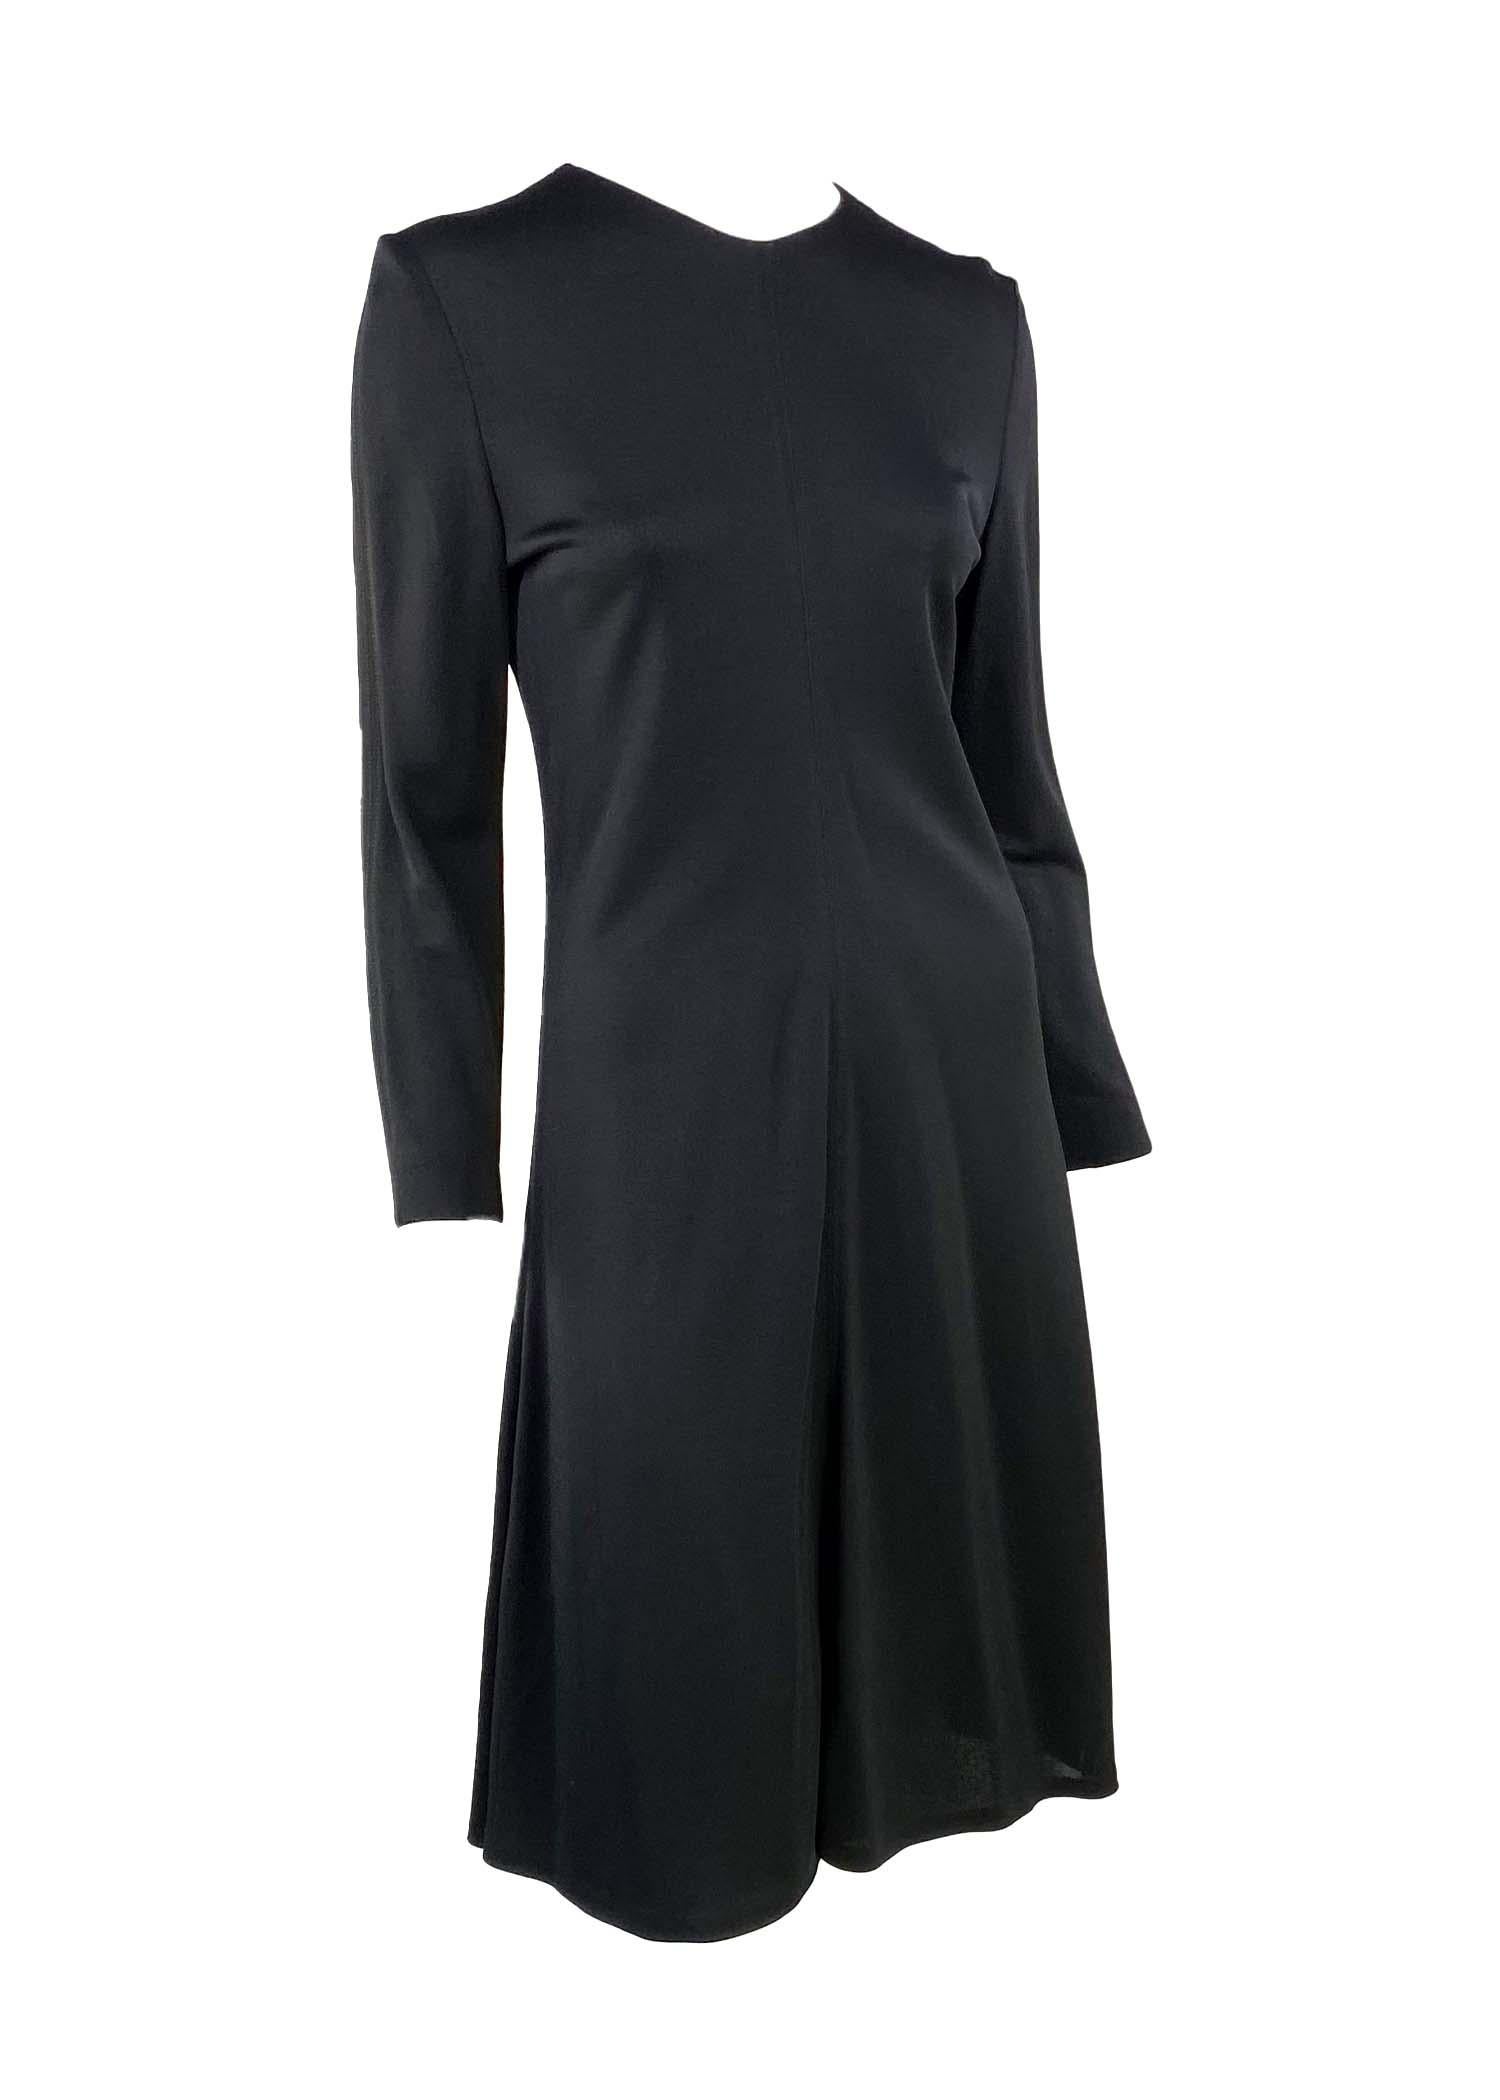 Women's F/W 1995 Gucci by Tom Ford Black Long Sleeve Dress For Sale